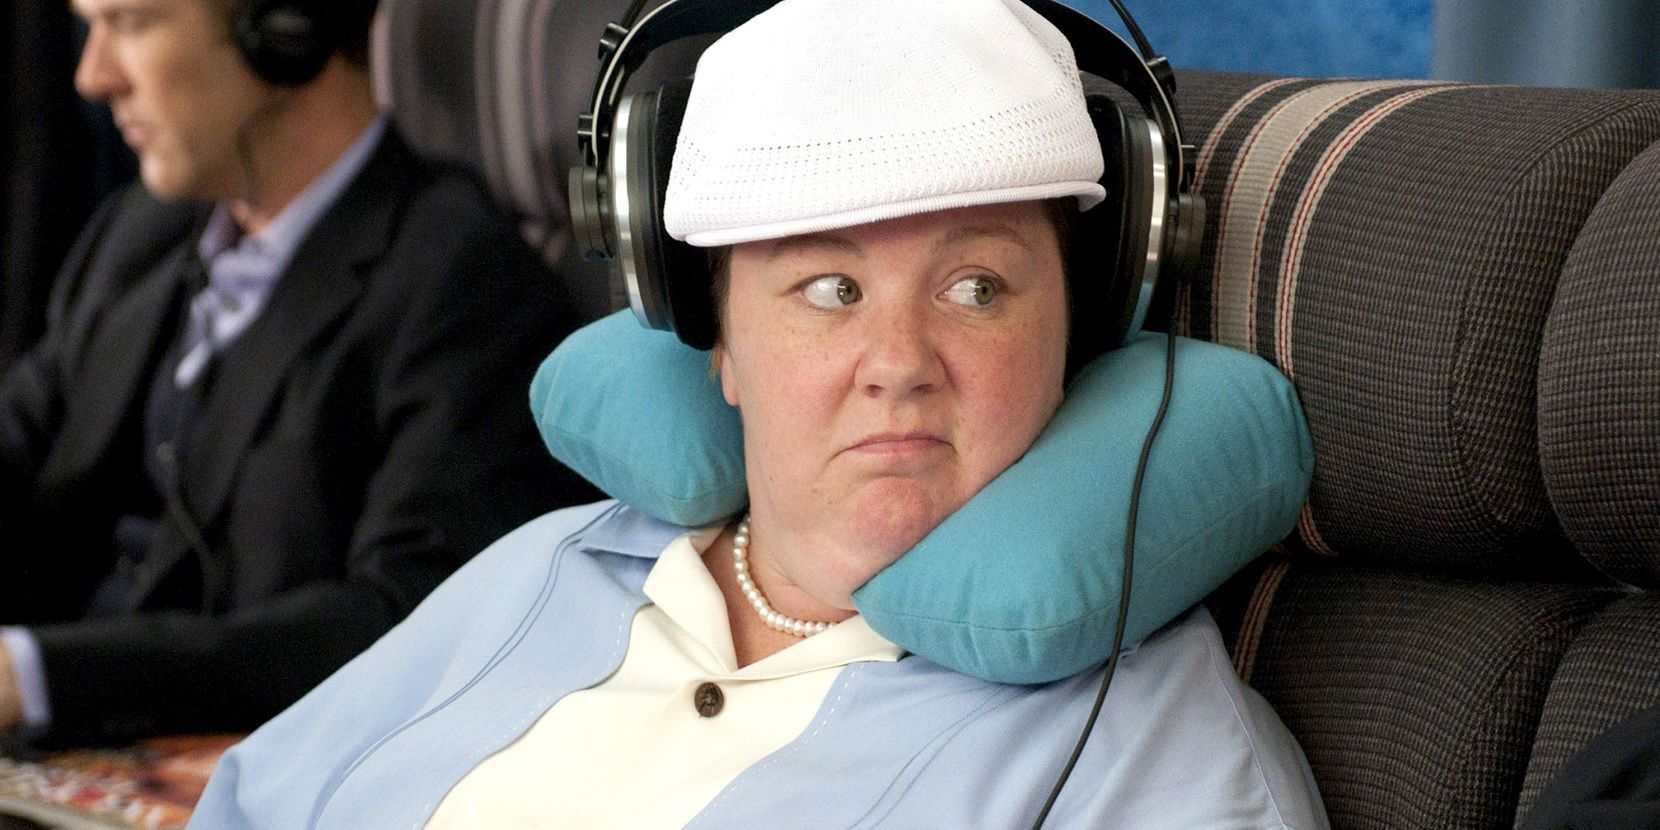 Megan on a plane in Bridesmaids